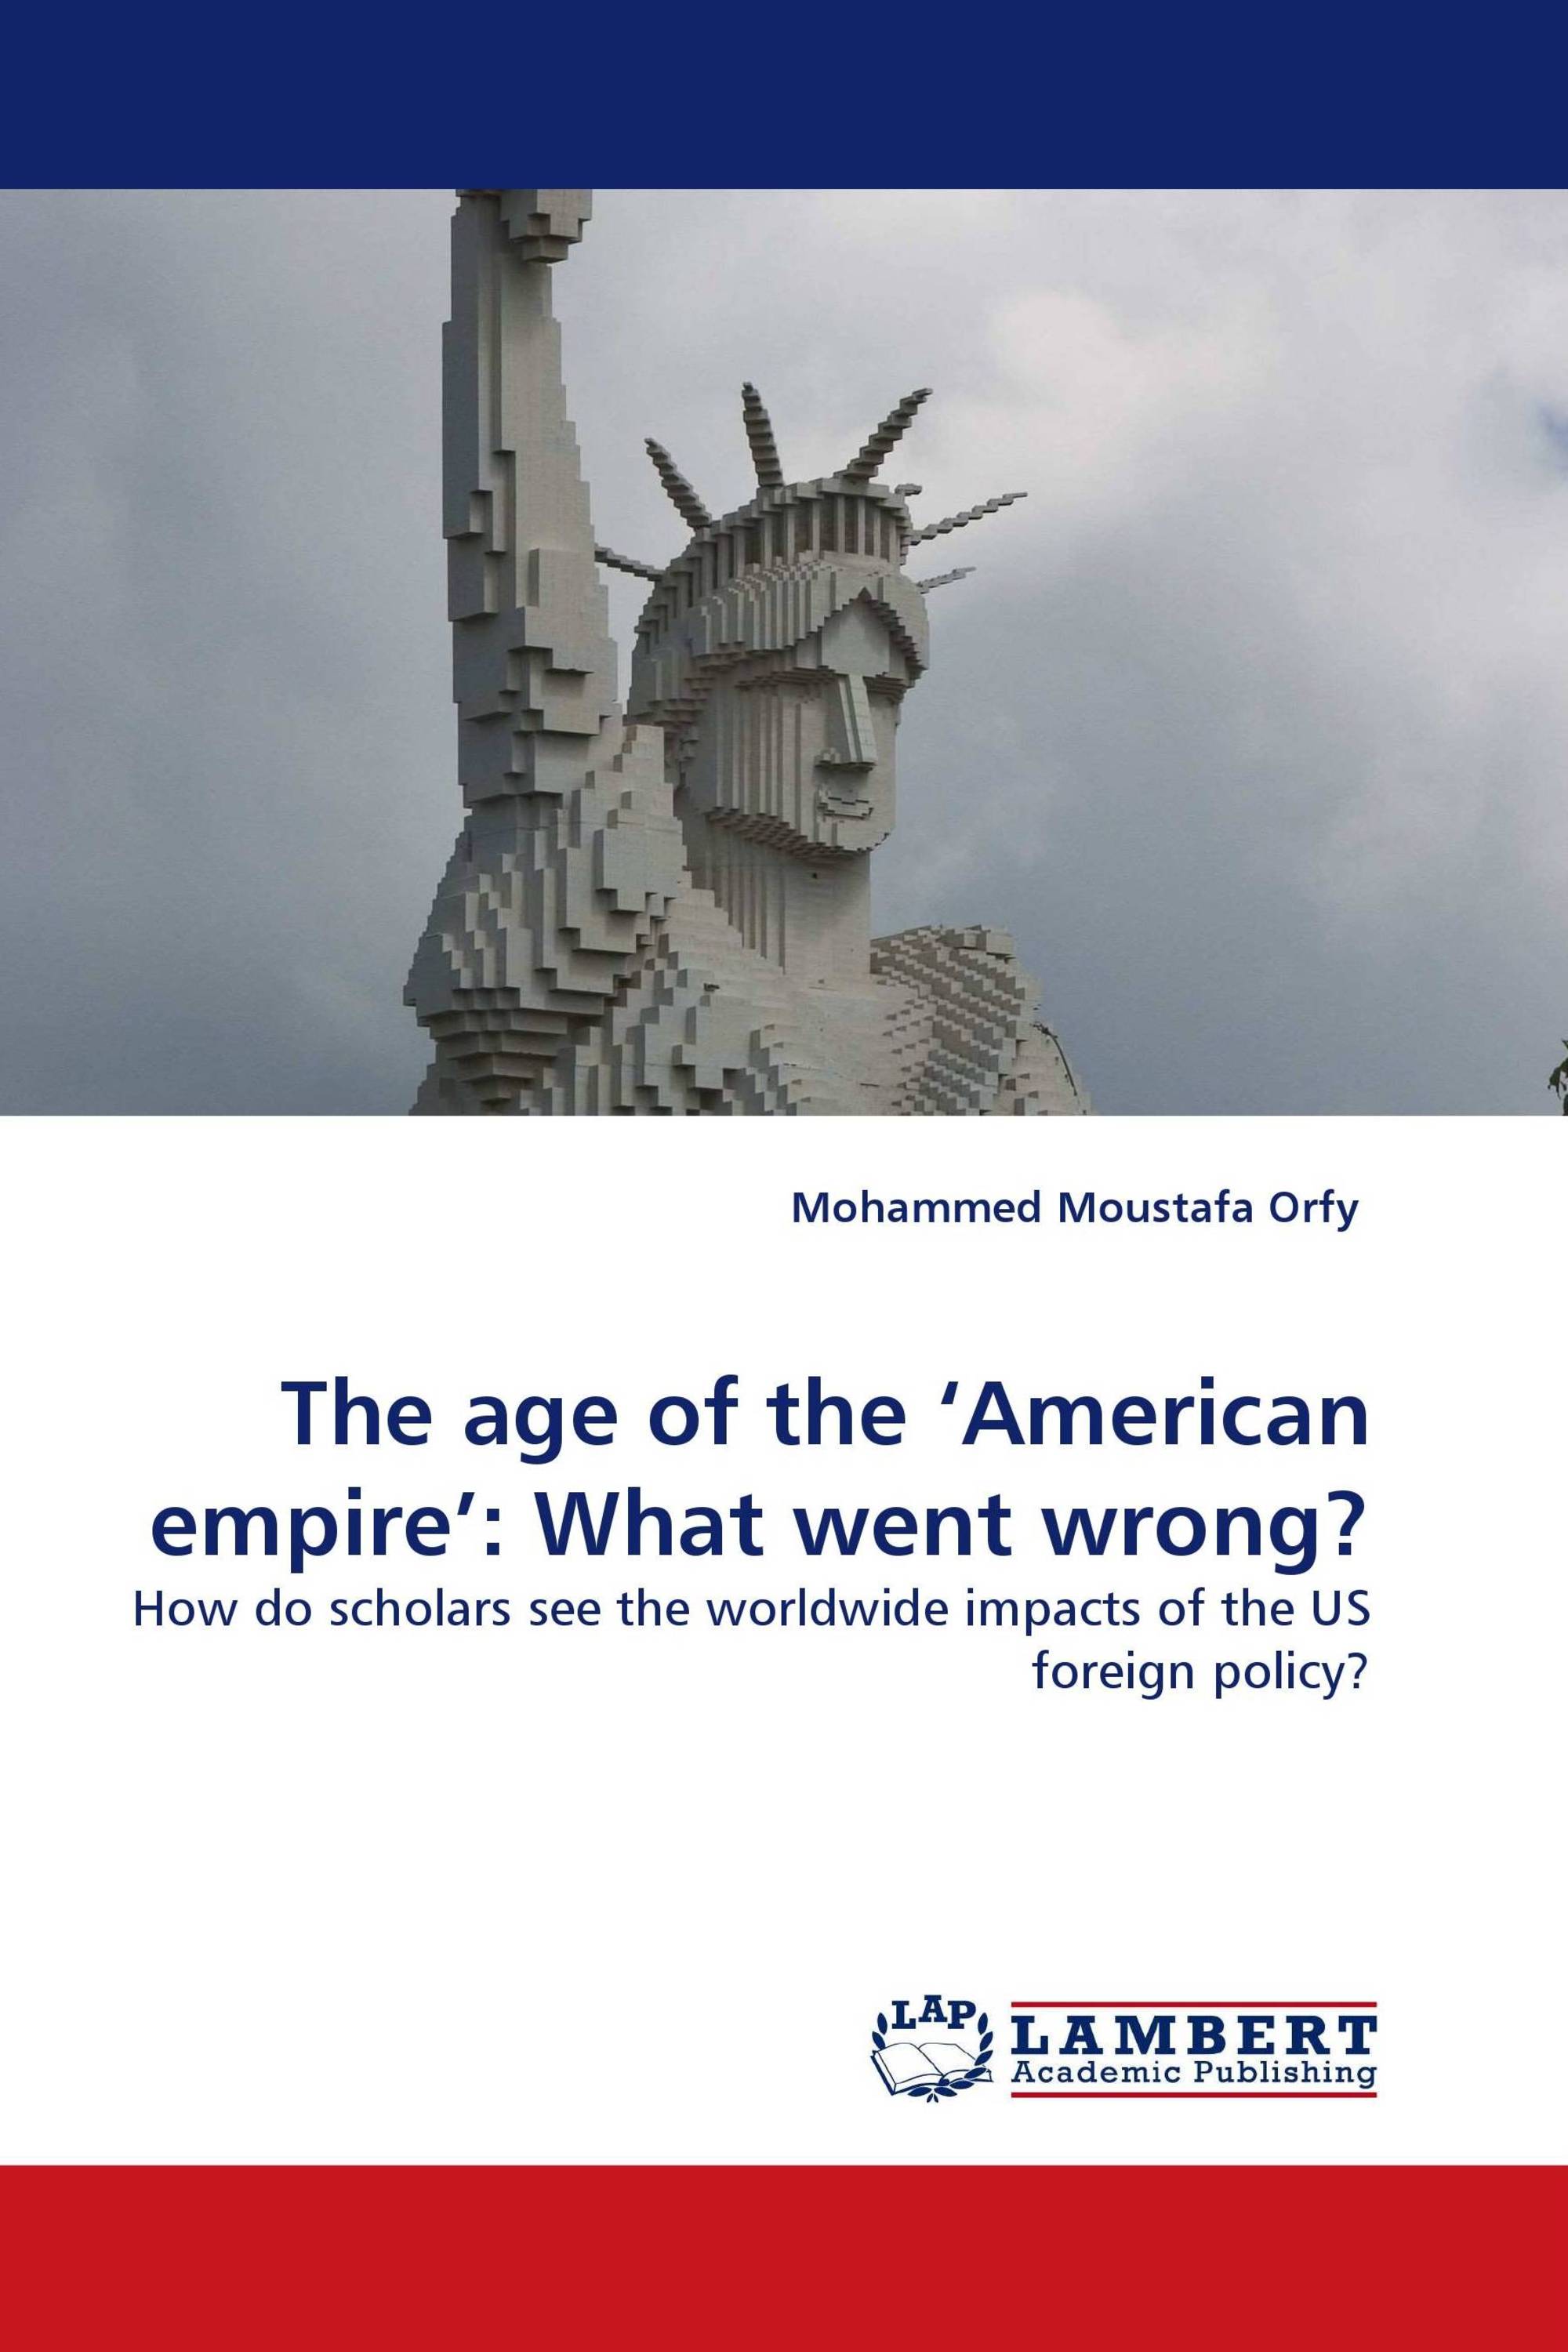 The age of the ‘American empire’: What went wrong?